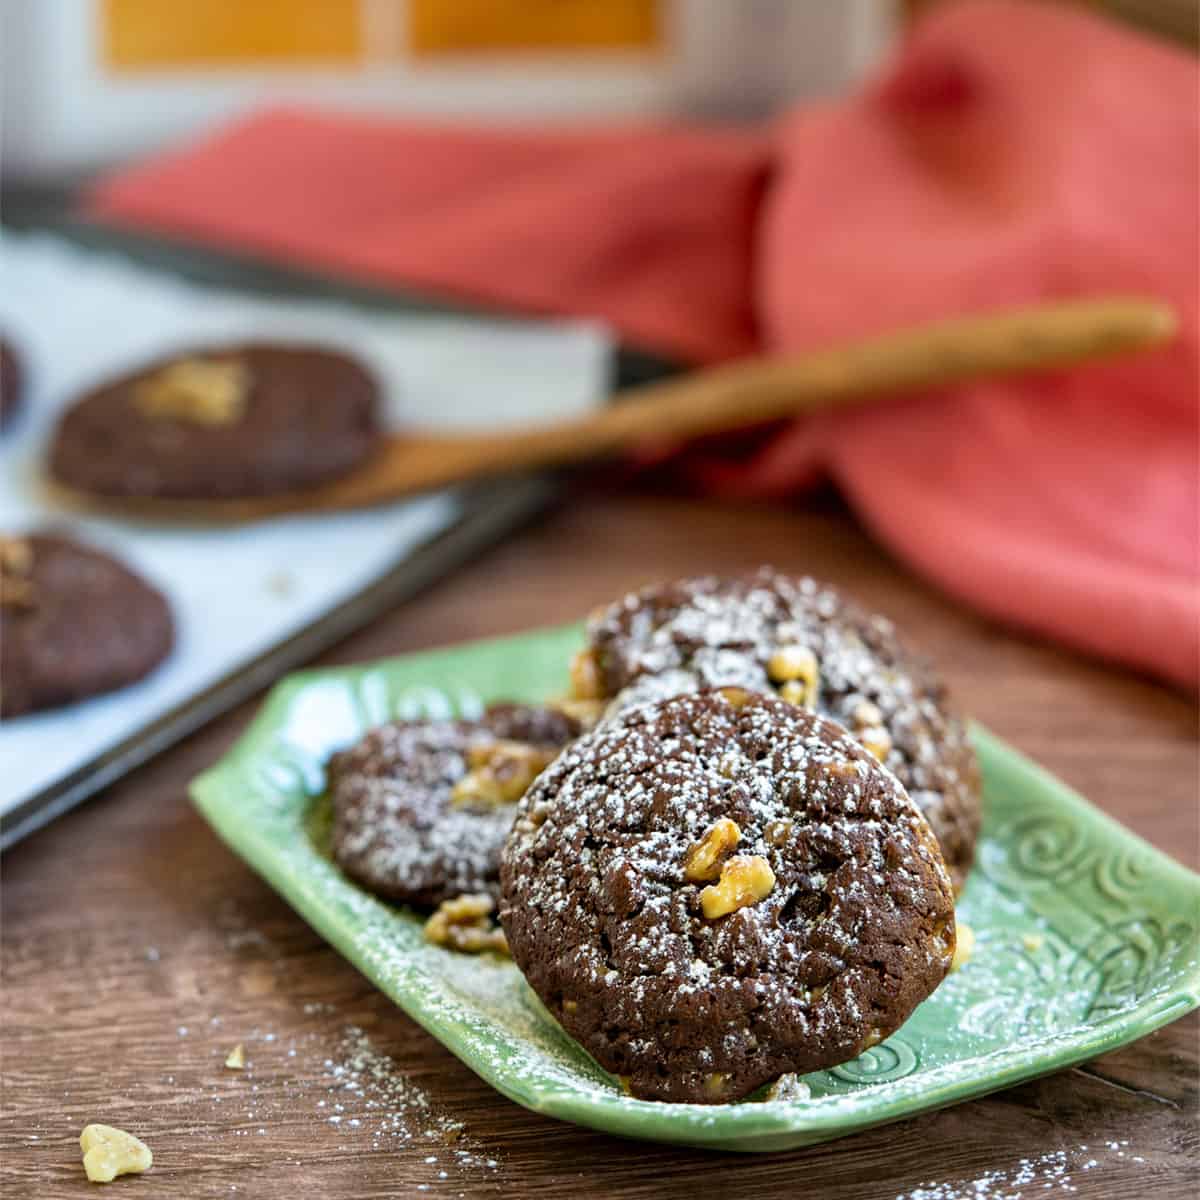 Chocolate Cookies with Orange and Toffee Bits sitting on a green plate with more cookies in the background.